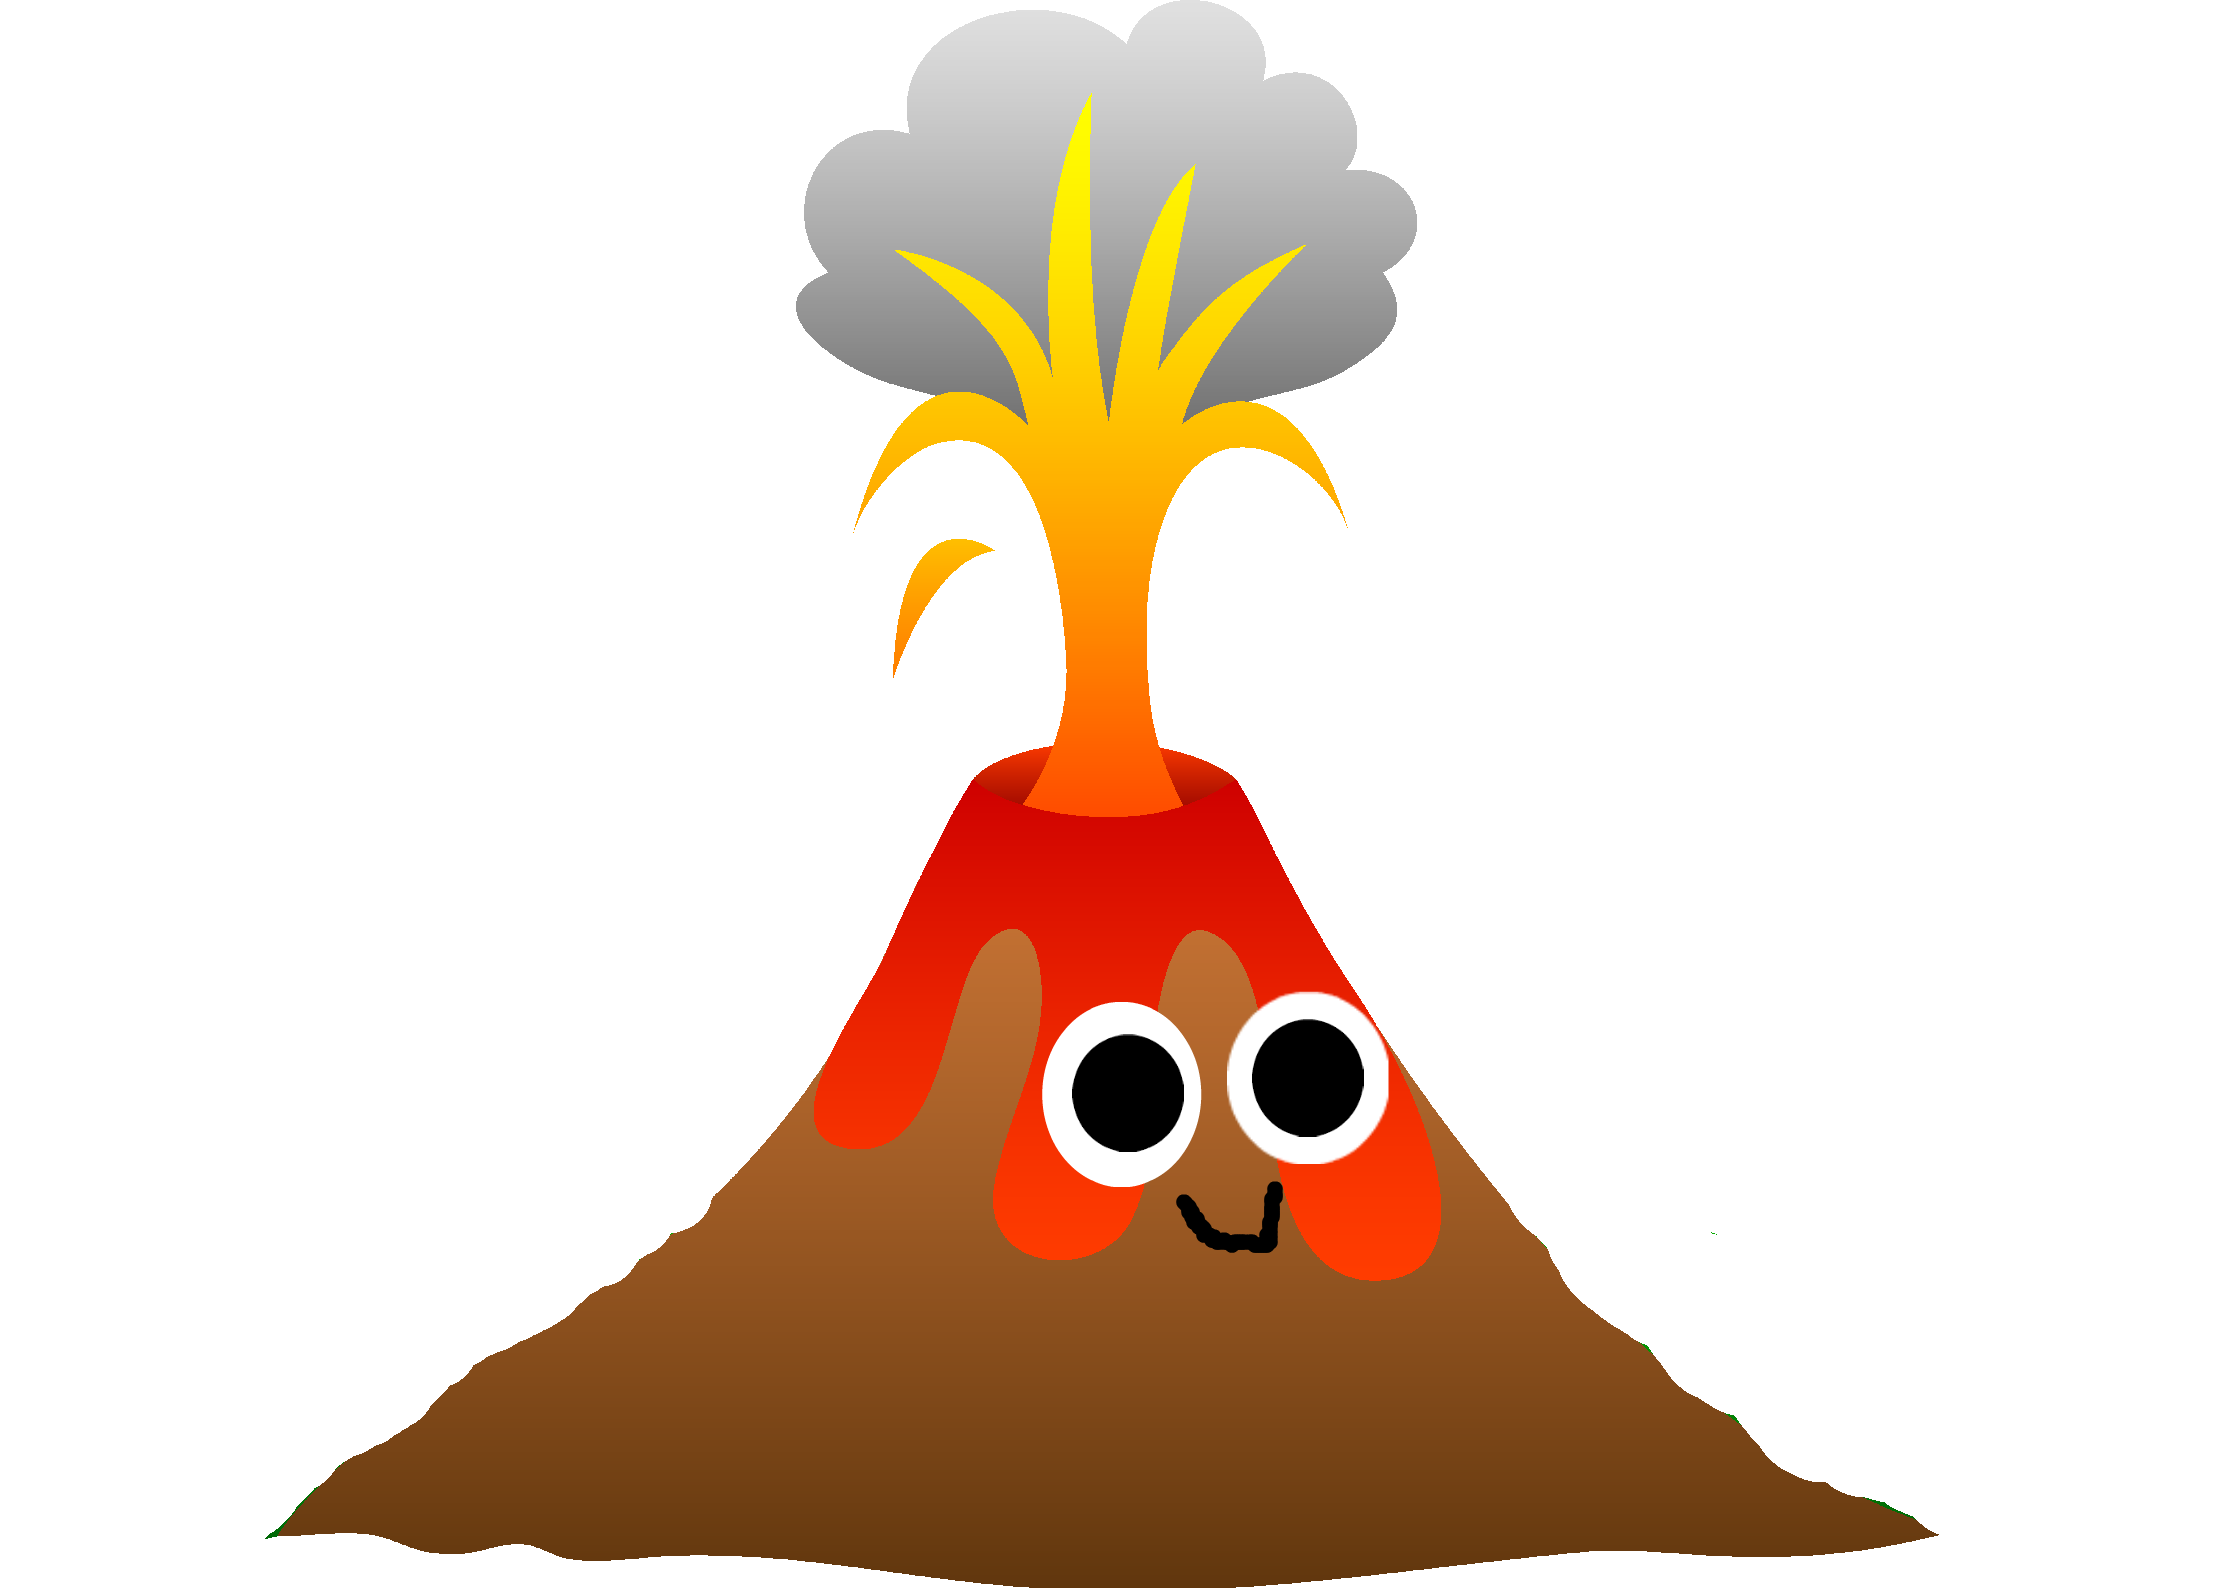 Clipart rock volcanic rock. Volcano eruption drawing at